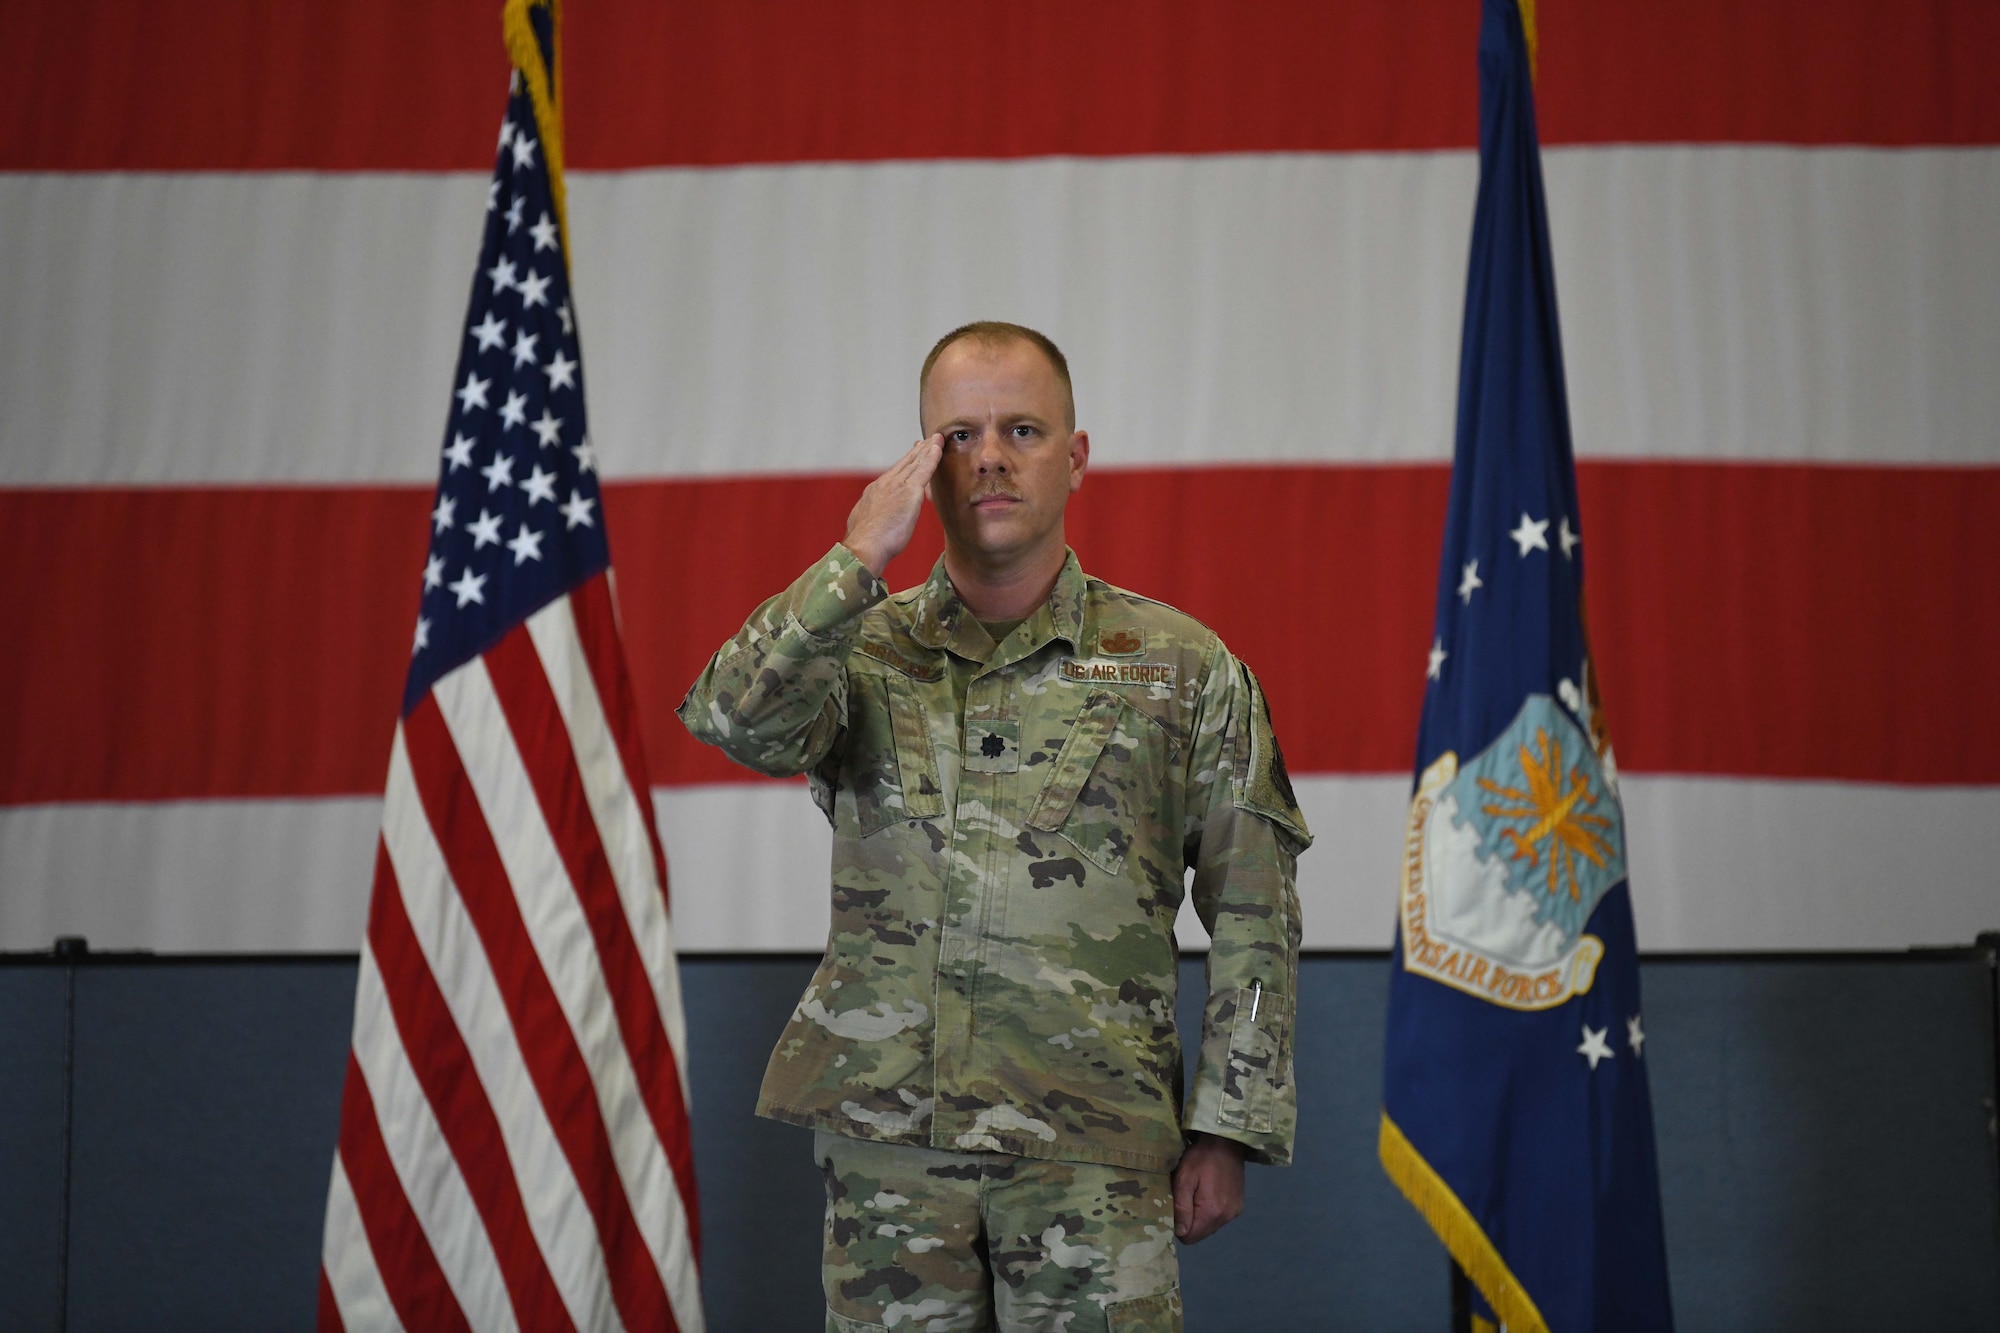 Lt. Col. William Brokaw, incoming commander of the 90th Missile Security Forces Squadron, renders his first salute to his troops during the 90 MSFS change of command ceremony in the Peacekeeper High Bay on F.E. Warren Air Force Base, Wyoming, July 13, 2021. The ceremony is to signify the transition of authority from Lt. Col David Celeste, outgoing commander of the 90th Missile Security Forces Squadron, to Brokaw. (U.S. Air Force photo by Airman 1st Class Darius Frazier)